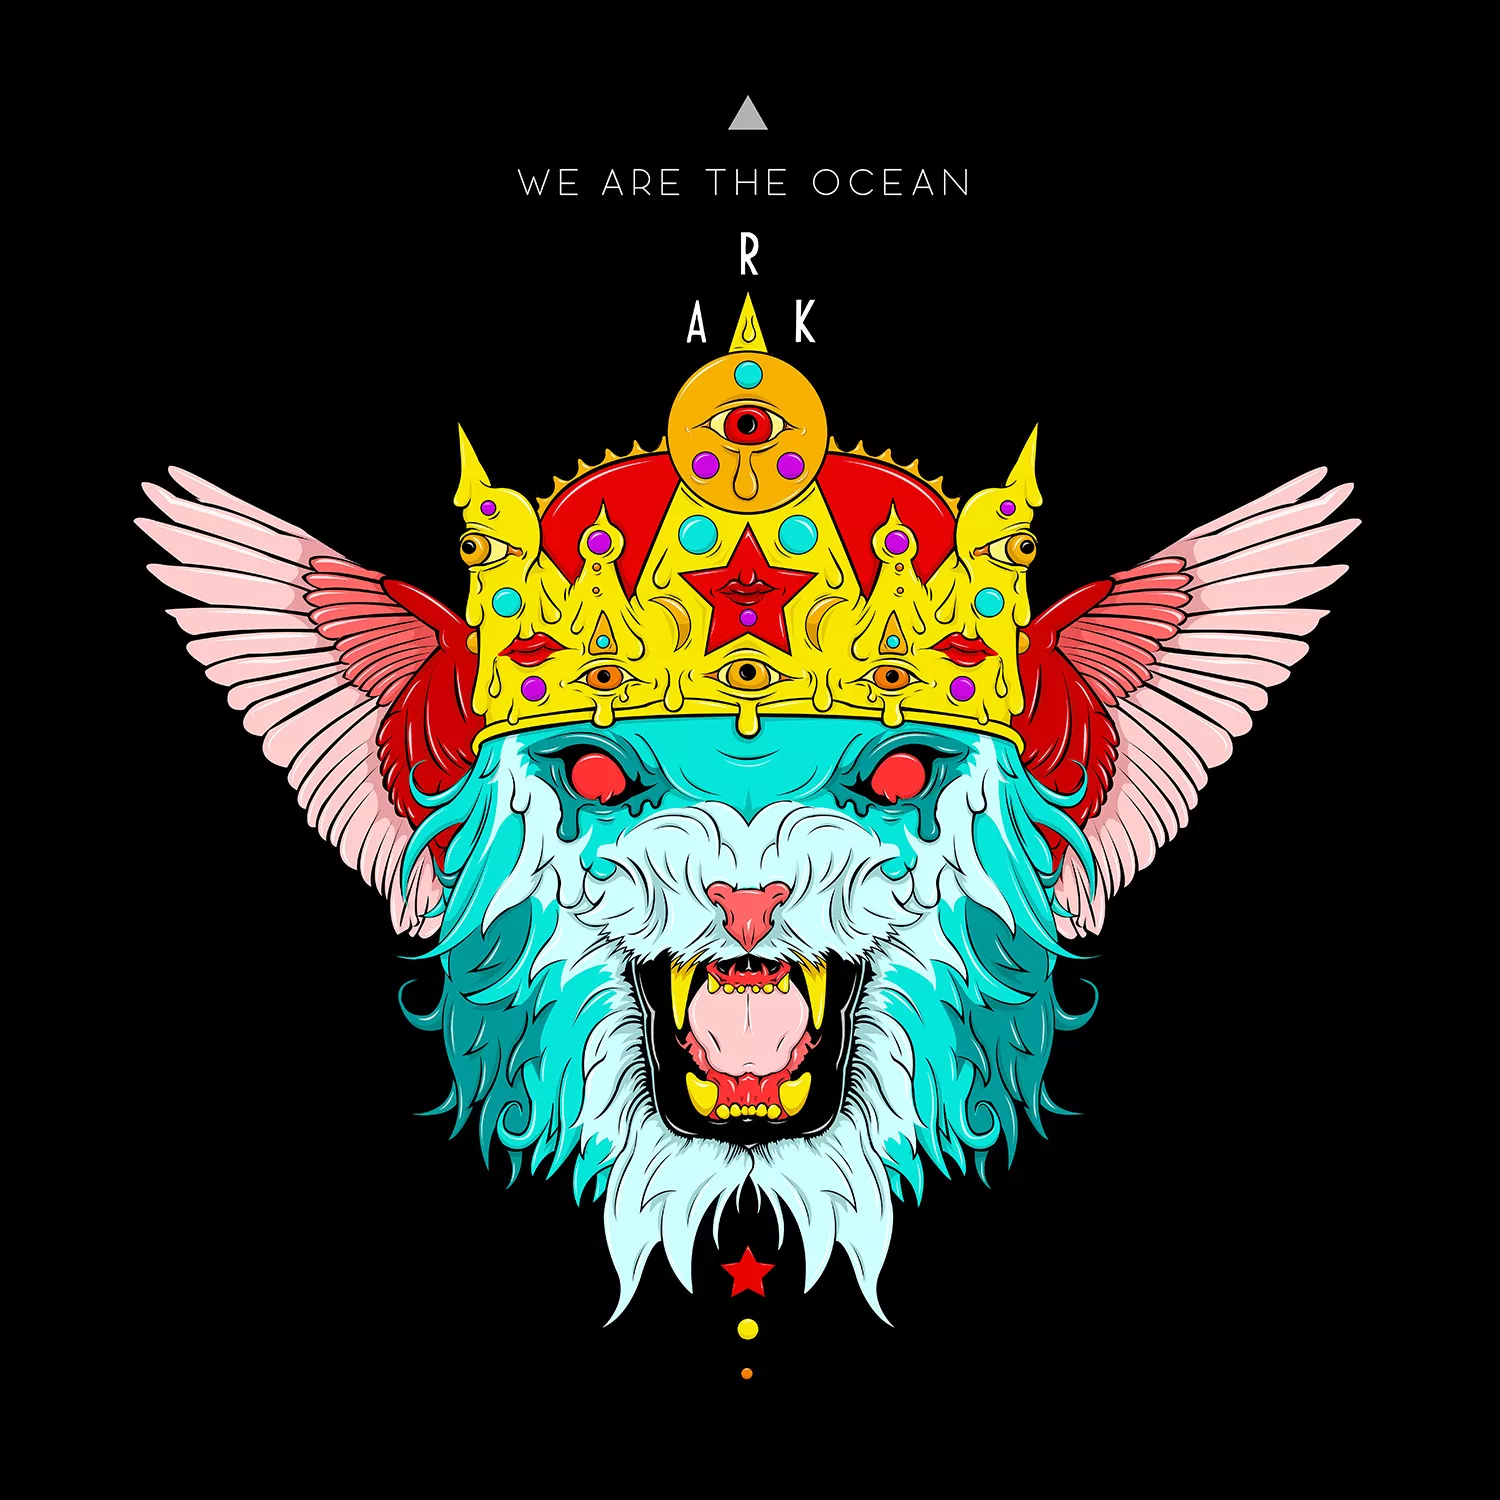 Ark - We Are The Ocean